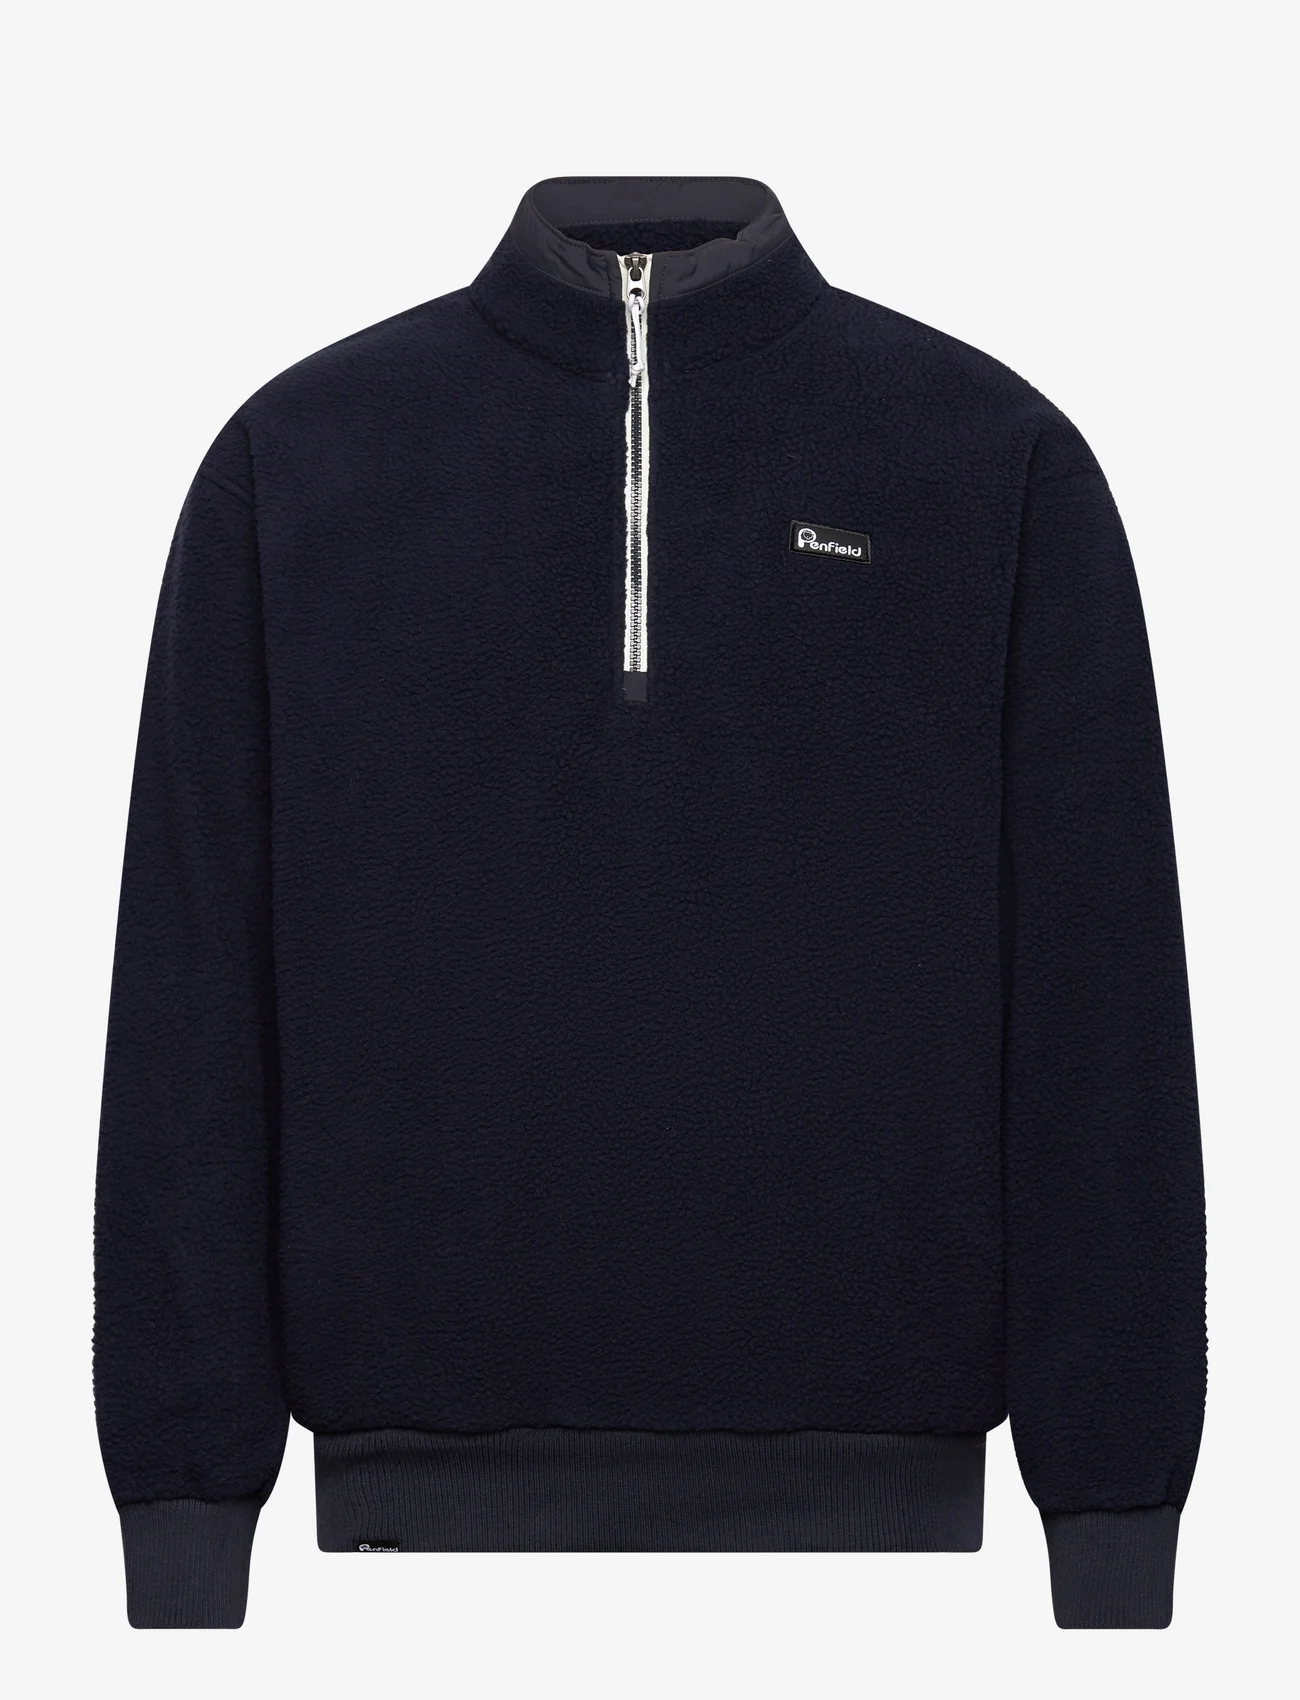 Penfield - Washed Fleece Funnel - mid layer jackets - navy blazer - 0